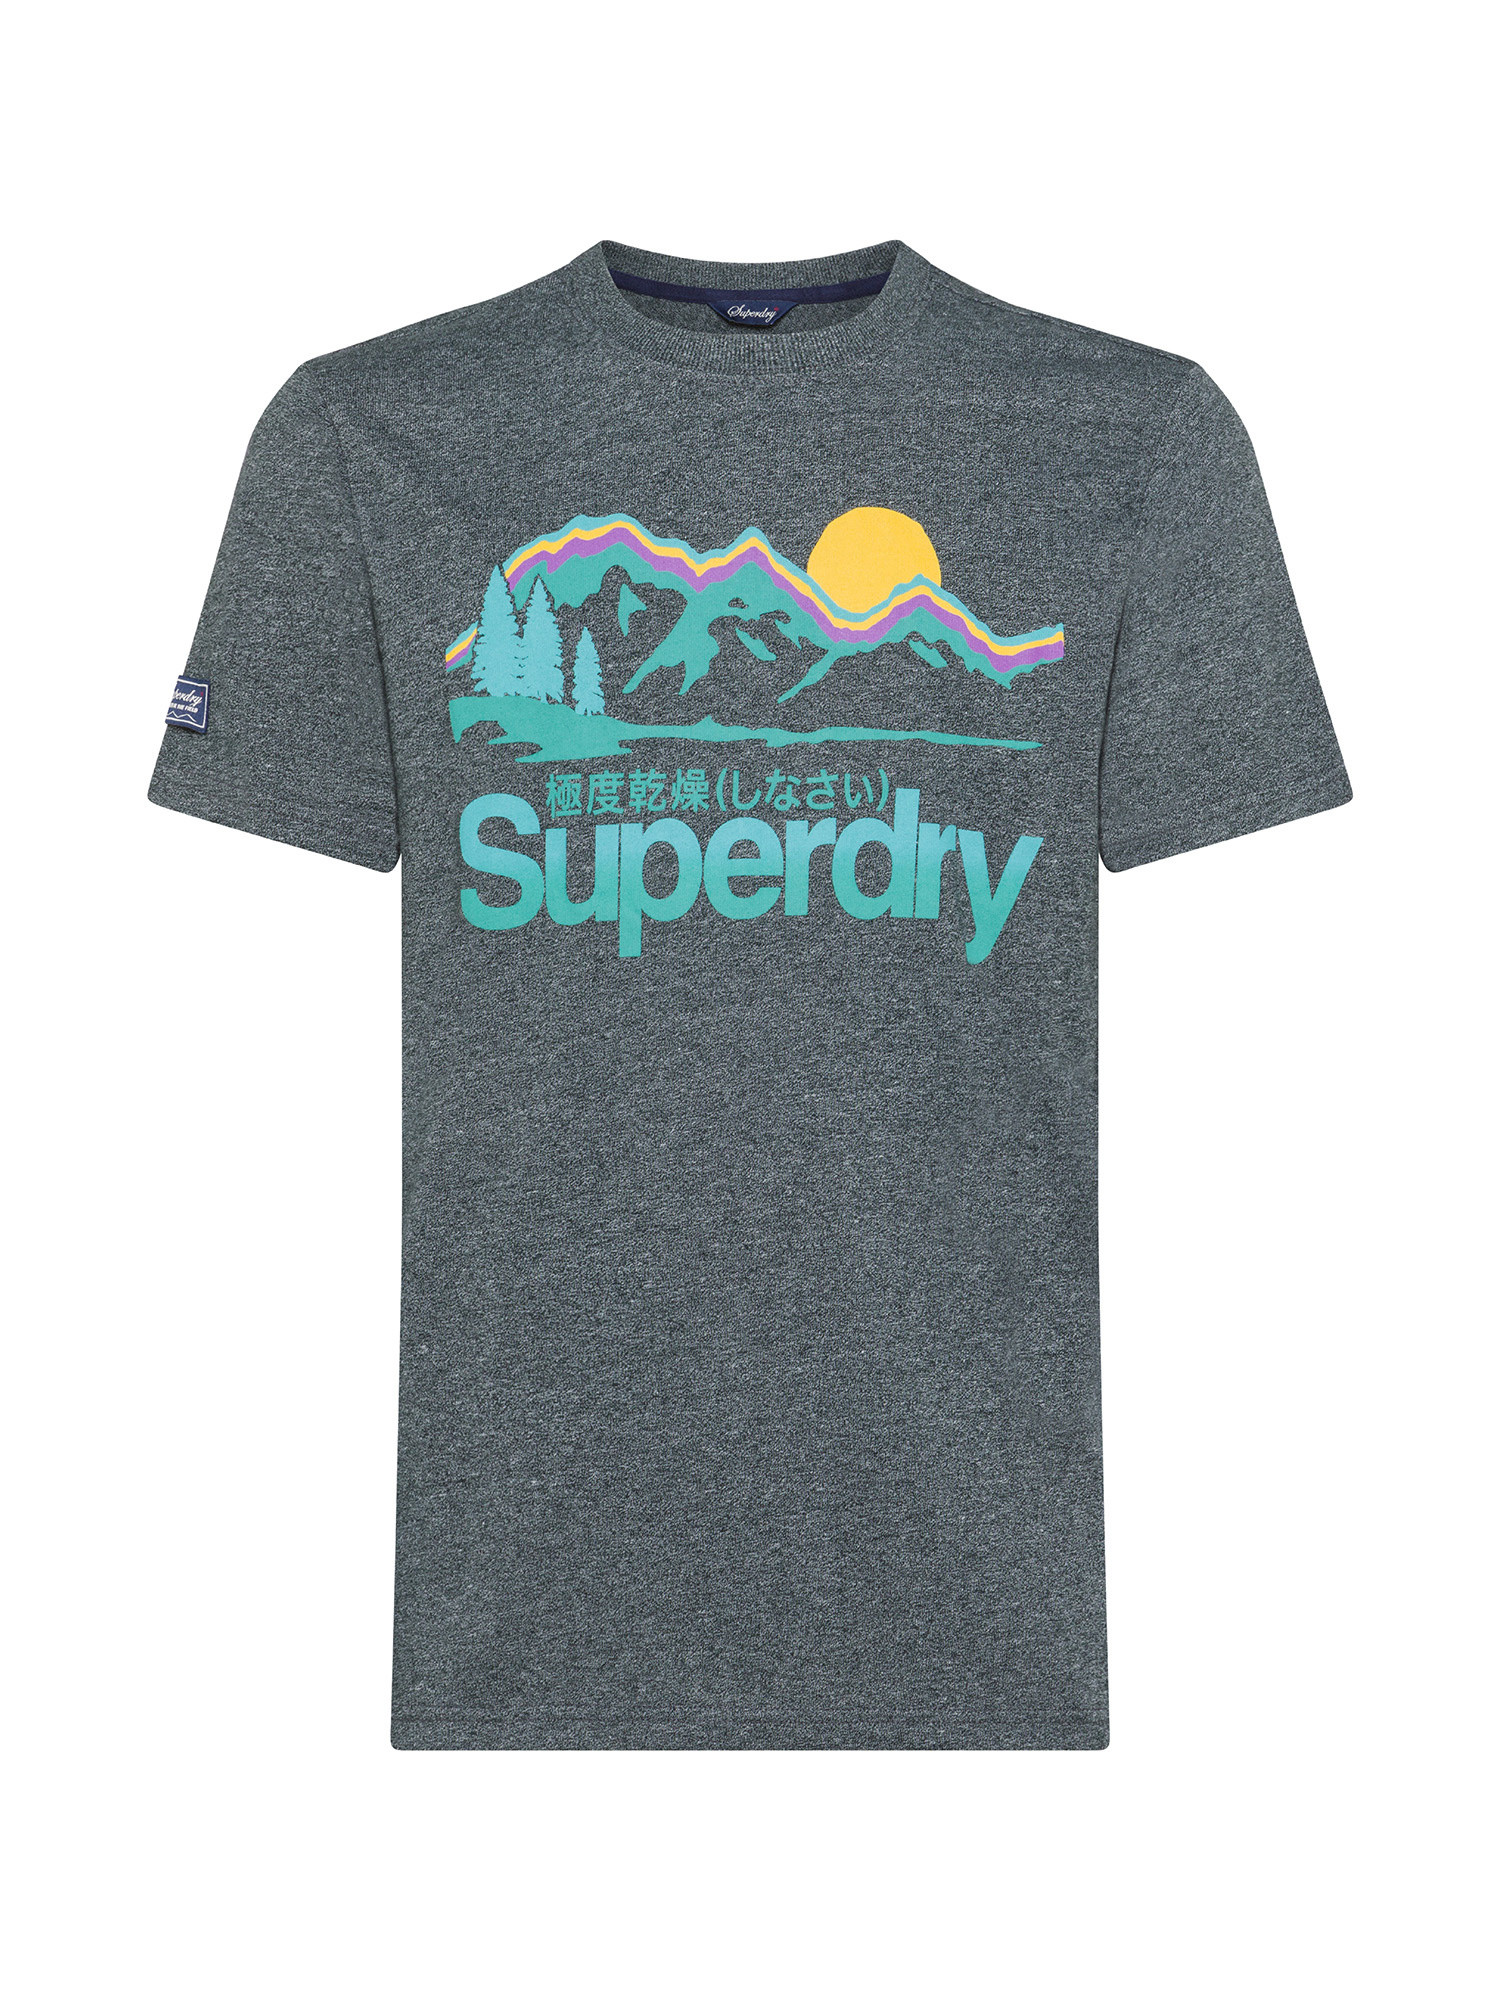 Superdry - T-shirt with print, Anthracite, large image number 0